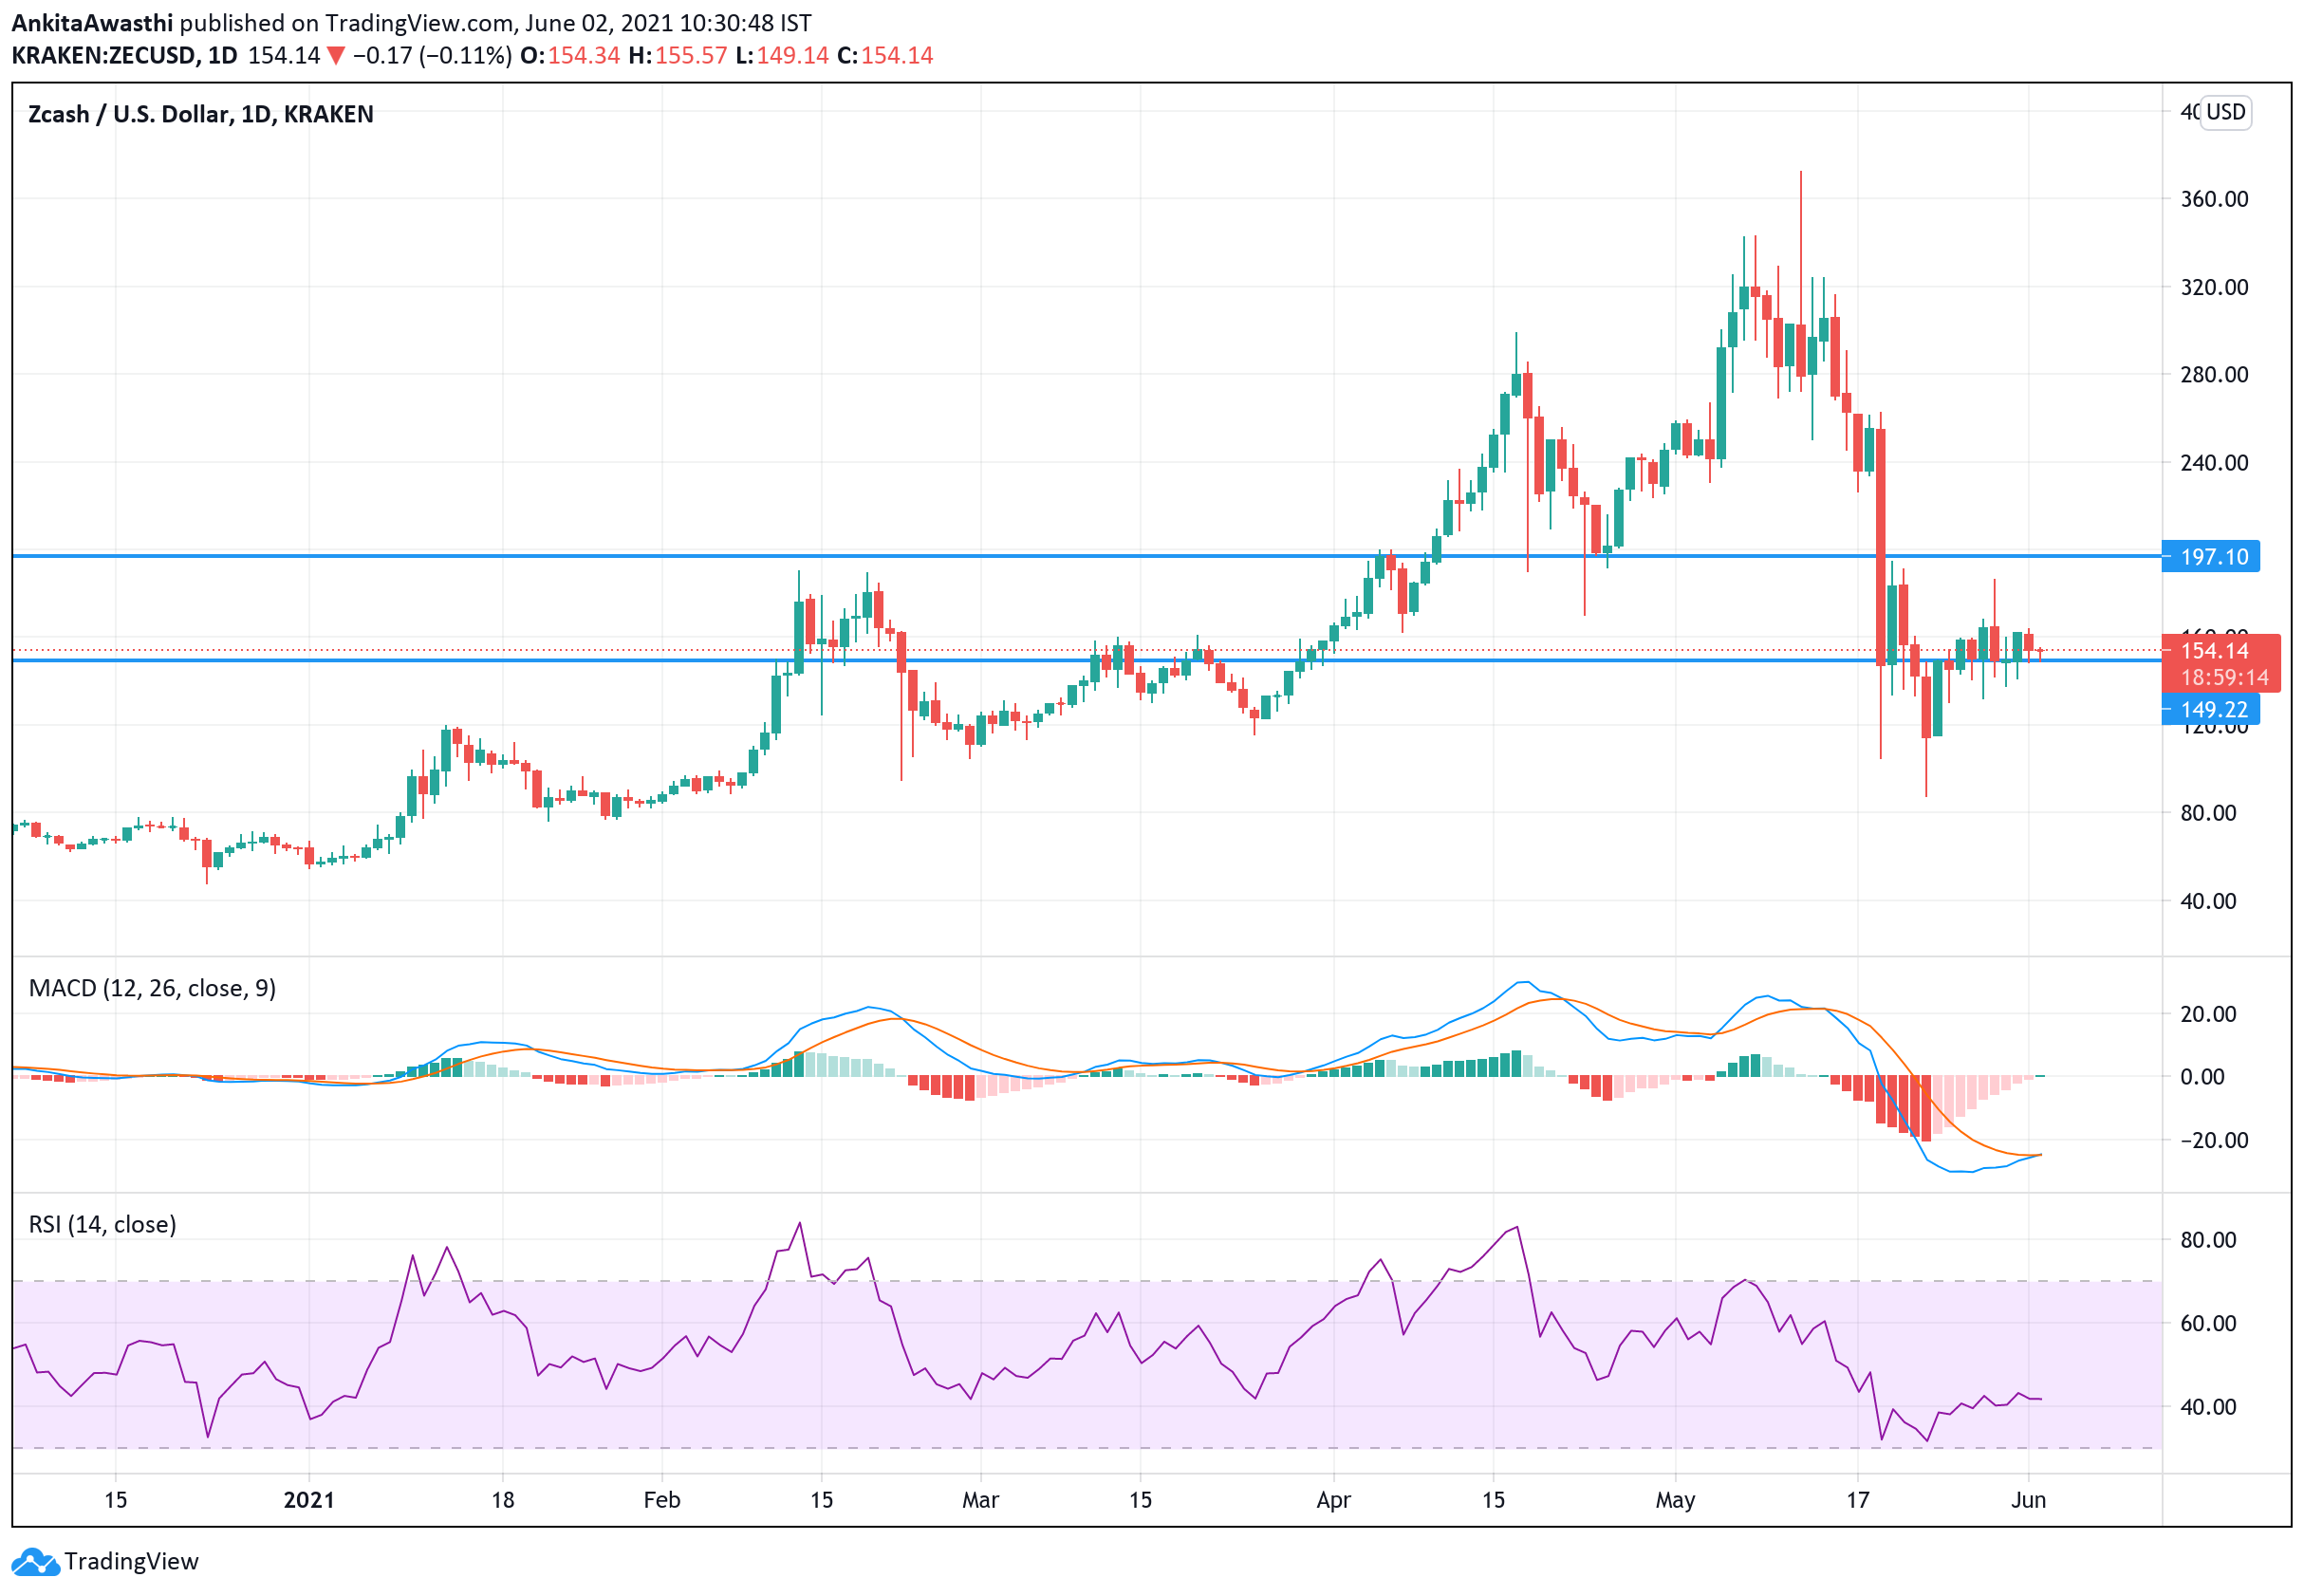 https://platoaistream.com/wp-content/uploads/2021/06/zec-technical-analysis-if-price-breaks-149-will-highlight-next-support-level-of-115-84.png